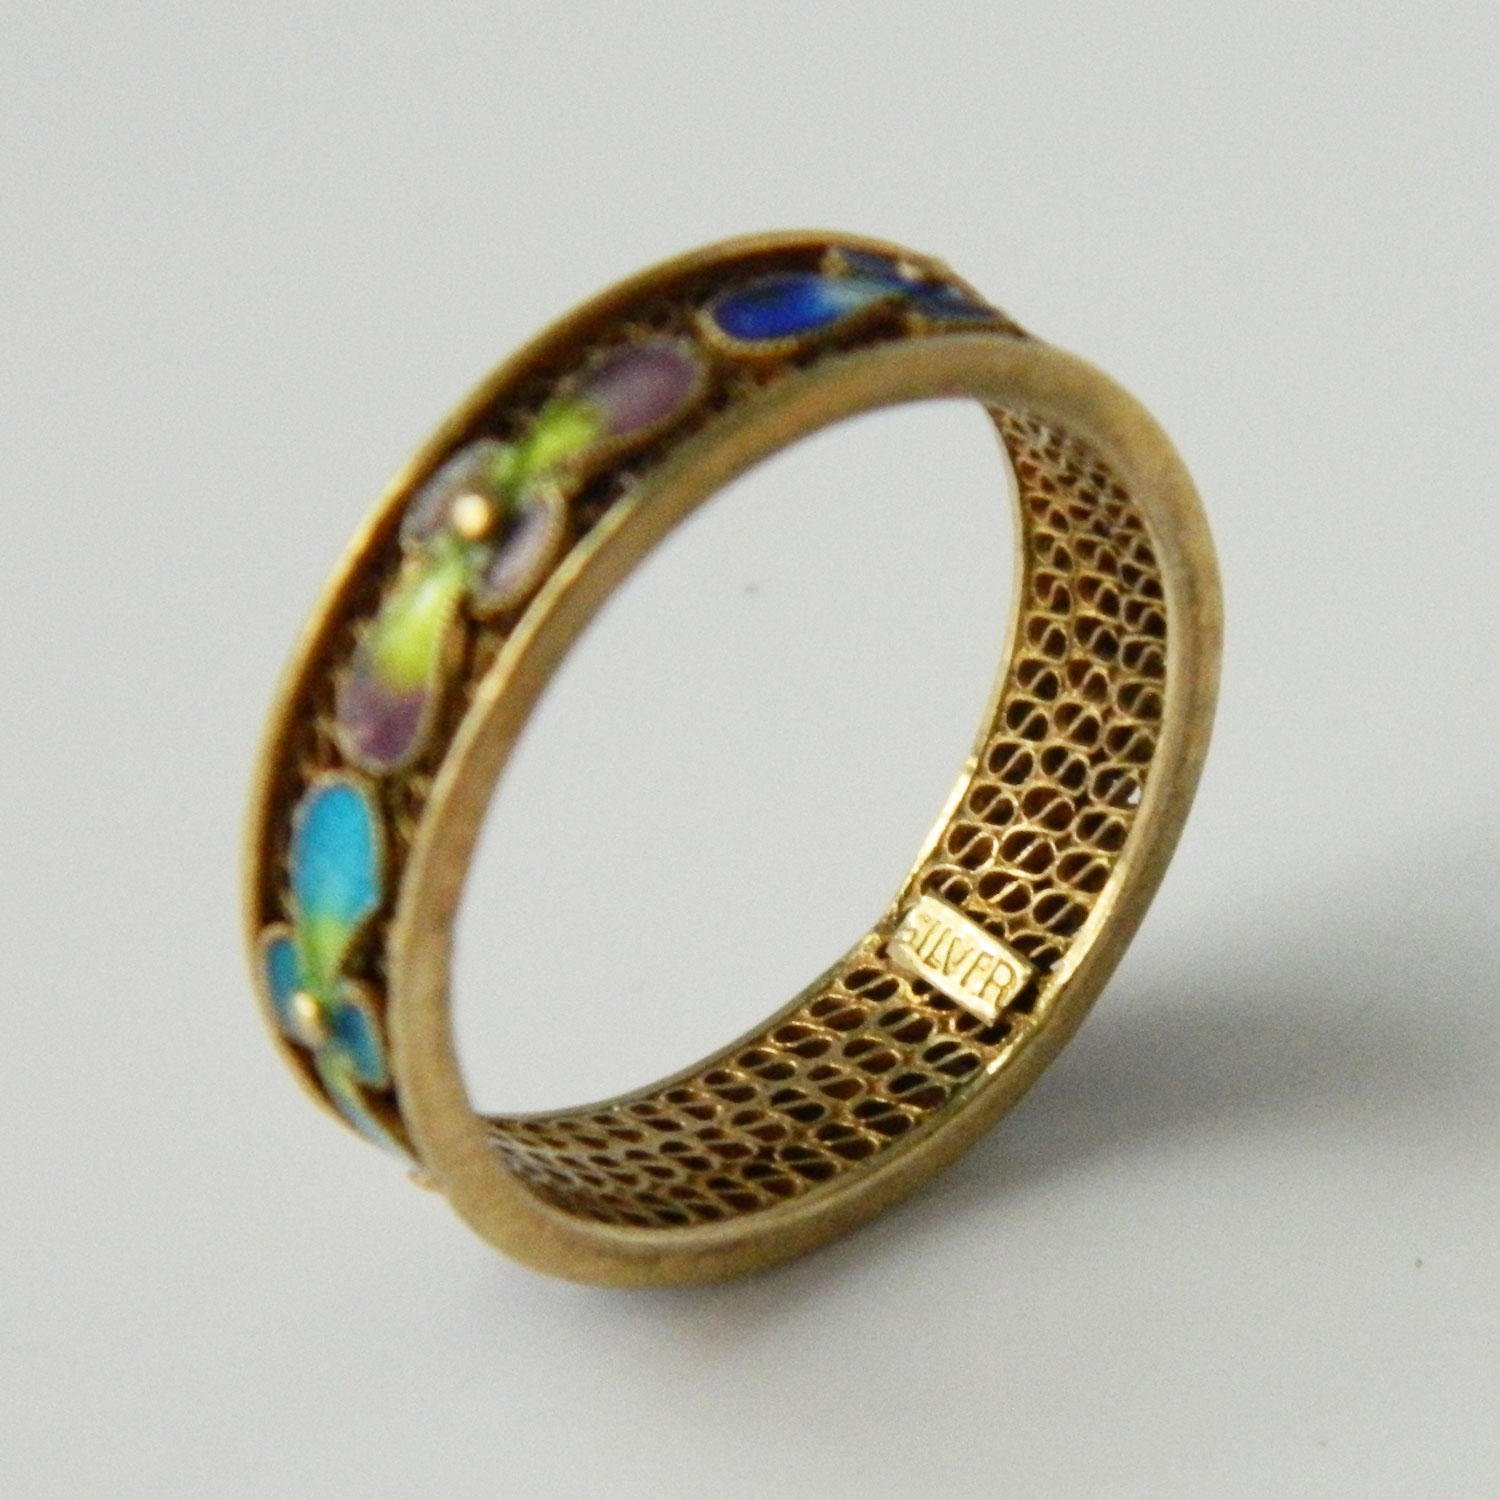 Chinese export enameled silver ring